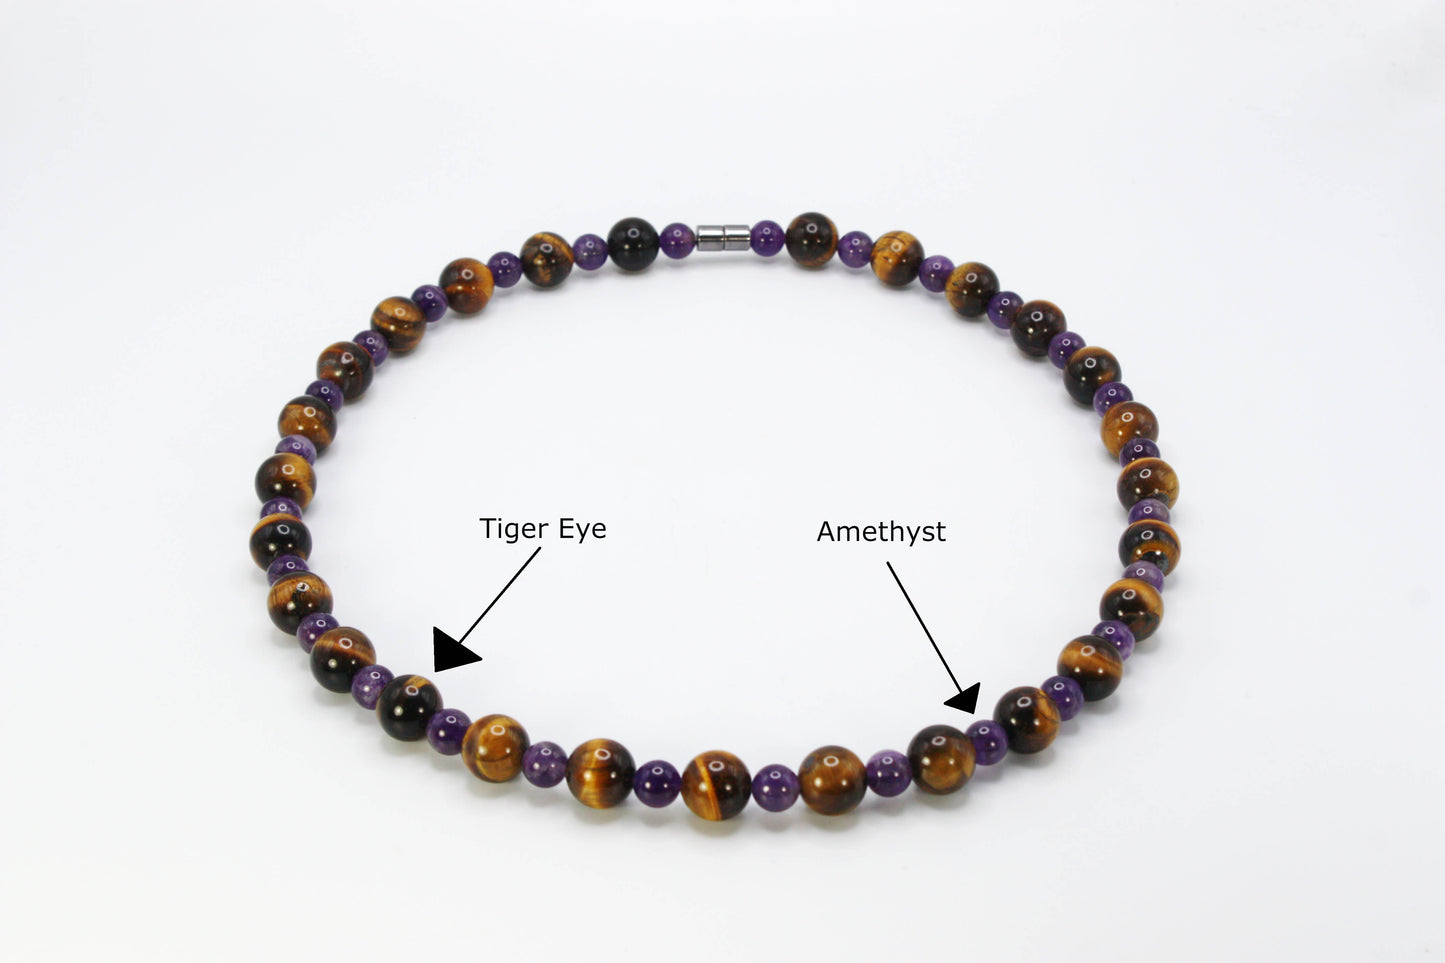 Genuine Tiger Eye and Amethyst Necklace - Gifts for Men/Women - 12mm and 8mm Beaded Necklace